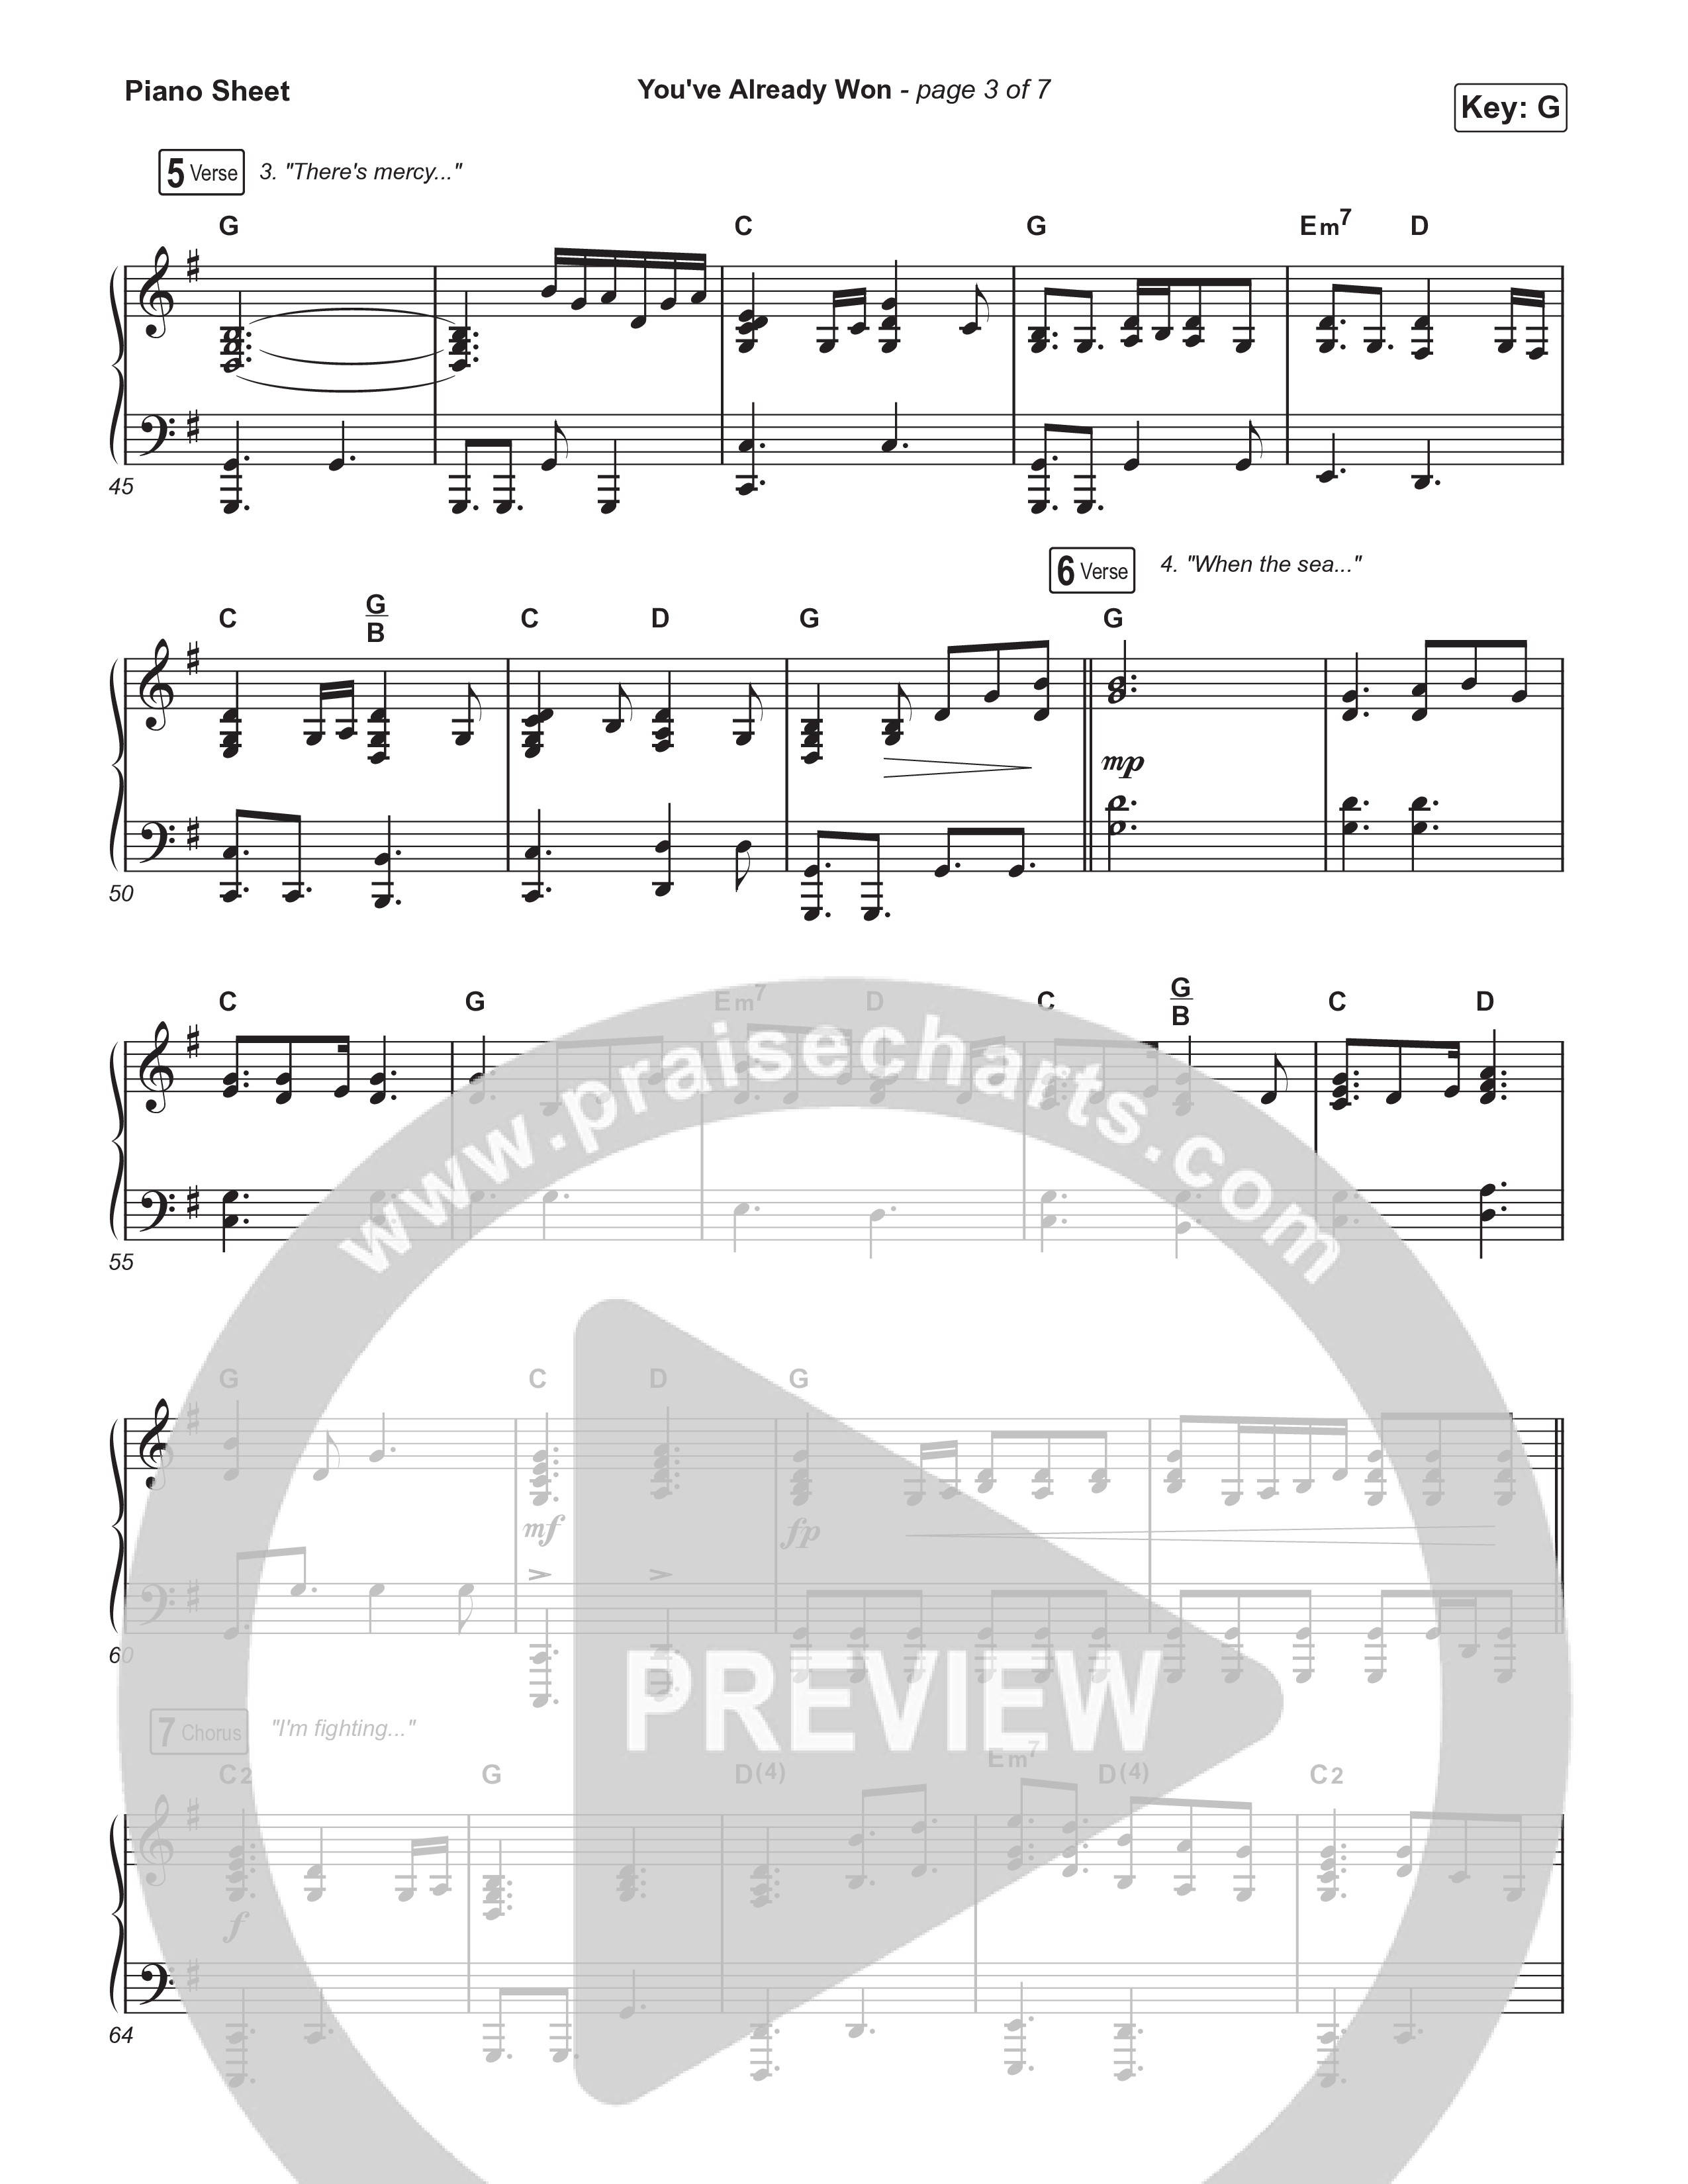 You've Already Won Piano Sheet (Travis Cottrell / Meredith Andrews / Arr. Mason Brown / Orch. Travis Patton)